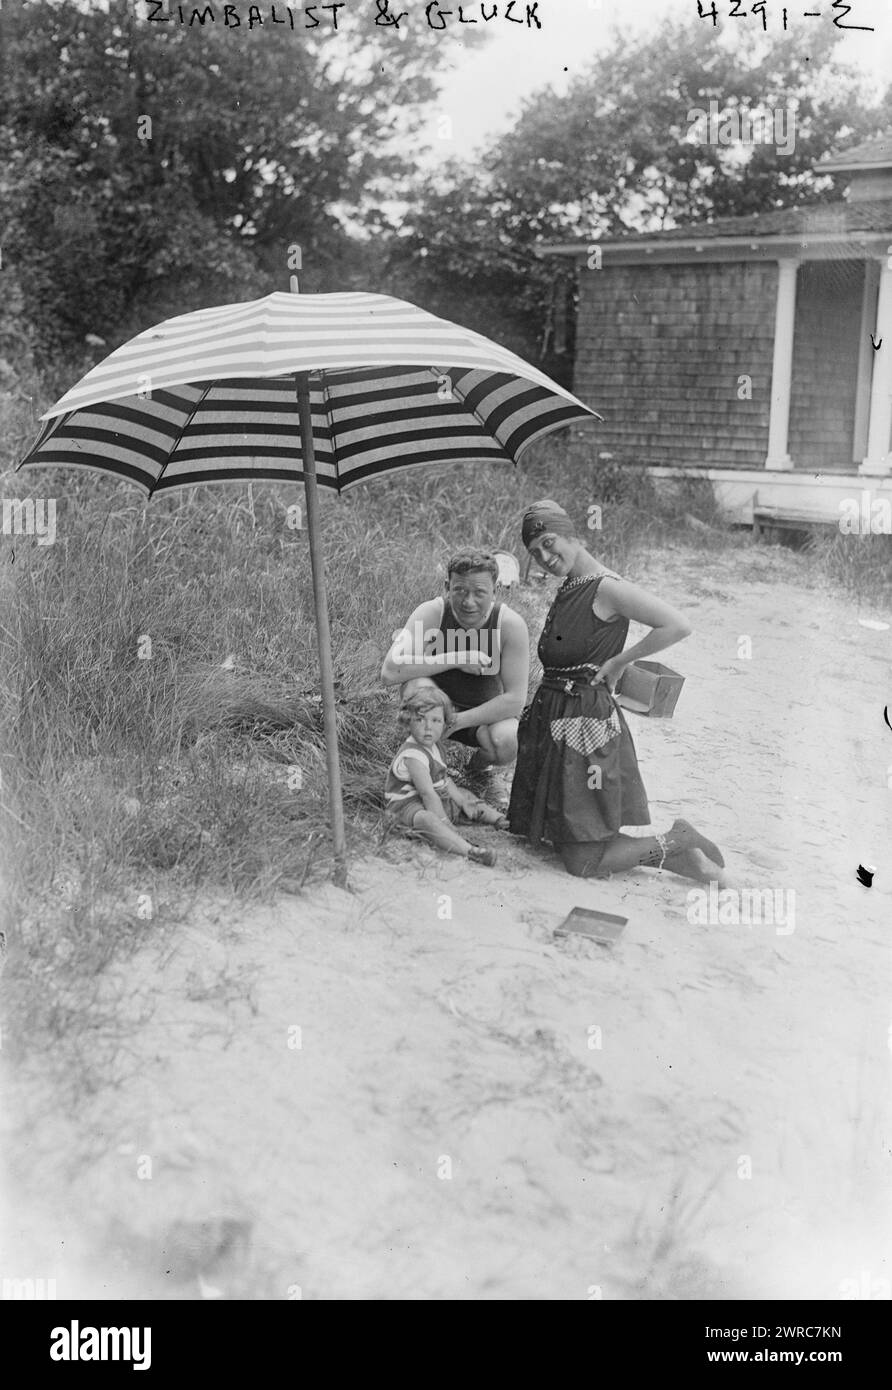 Zimbalist & Gluck, Photograph shows Romanian-born American soprano opera singer Alma Gluck (1884-1939) with her husband, Efrem Zimbalist, Sr. and their daughter Maria, under a beach umbrella, vacationing possibly on Fishers Island, New York, August, 1917. Zimbalist was an internationally known concert violinist, composer, teacher, conductor, and director of the Curtis Institute of Music., 1917 August, Glass negatives, 1 negative: glass Stock Photo